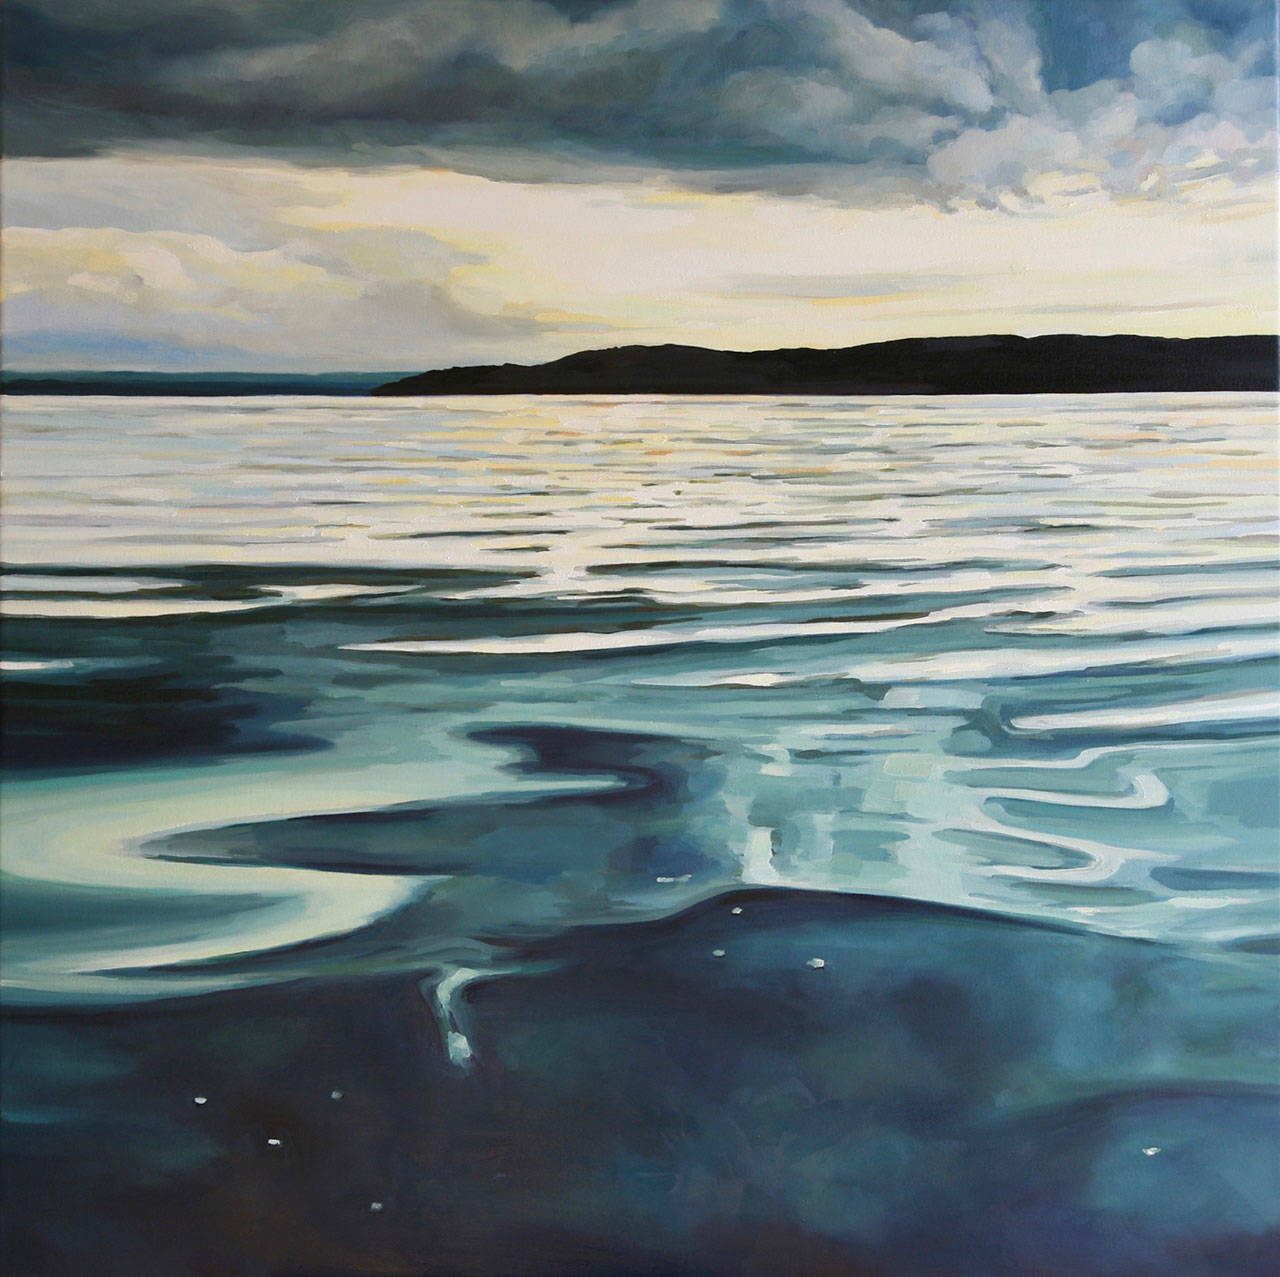 Image courtesy of Kelly Johnston | “On the Sound,” by Kelly Johnston. The Bainbridge painter has been chosen as one of the artists to be featured in the upcoming 2020 Collective Visions Gallery annual show.